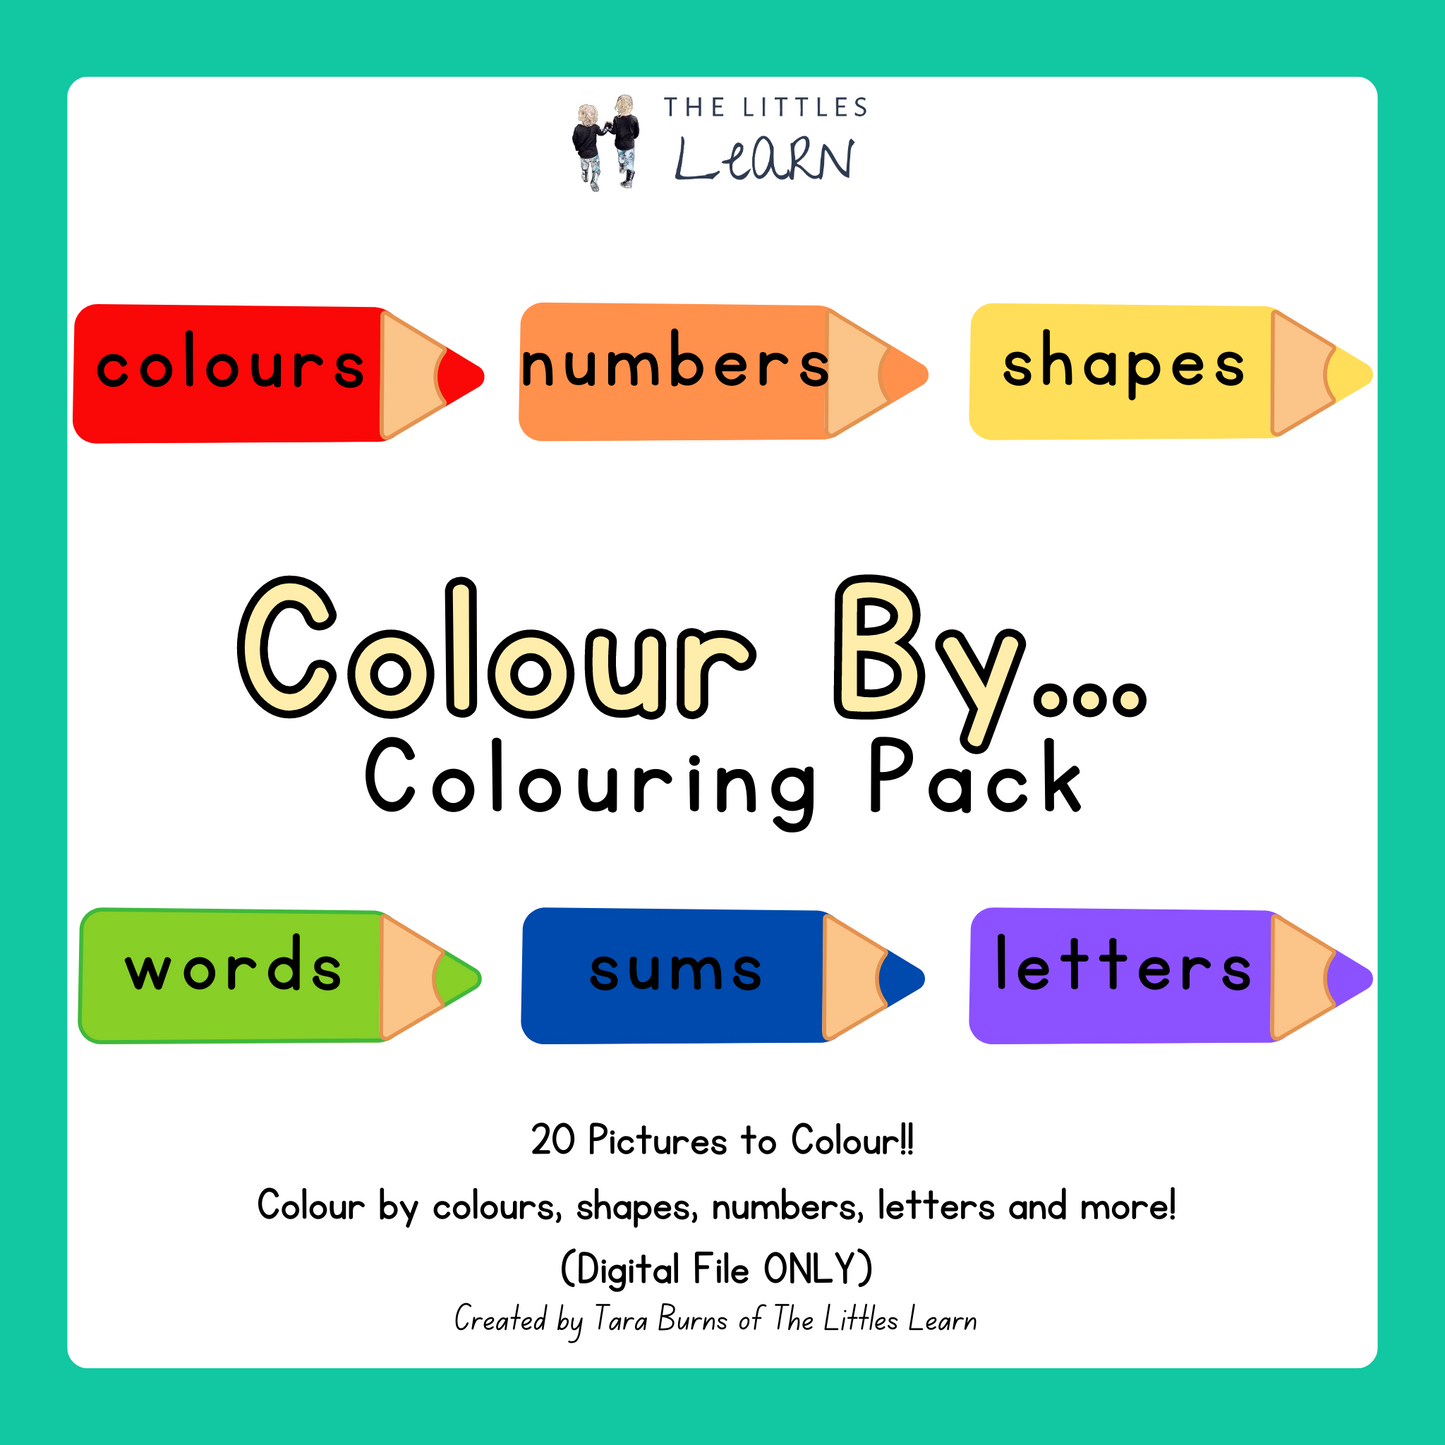 20 colouring pictures featuring bold and simple pictures to colour in using colour codes, shape matching, numbers, alphabet or words to colour in each picture.